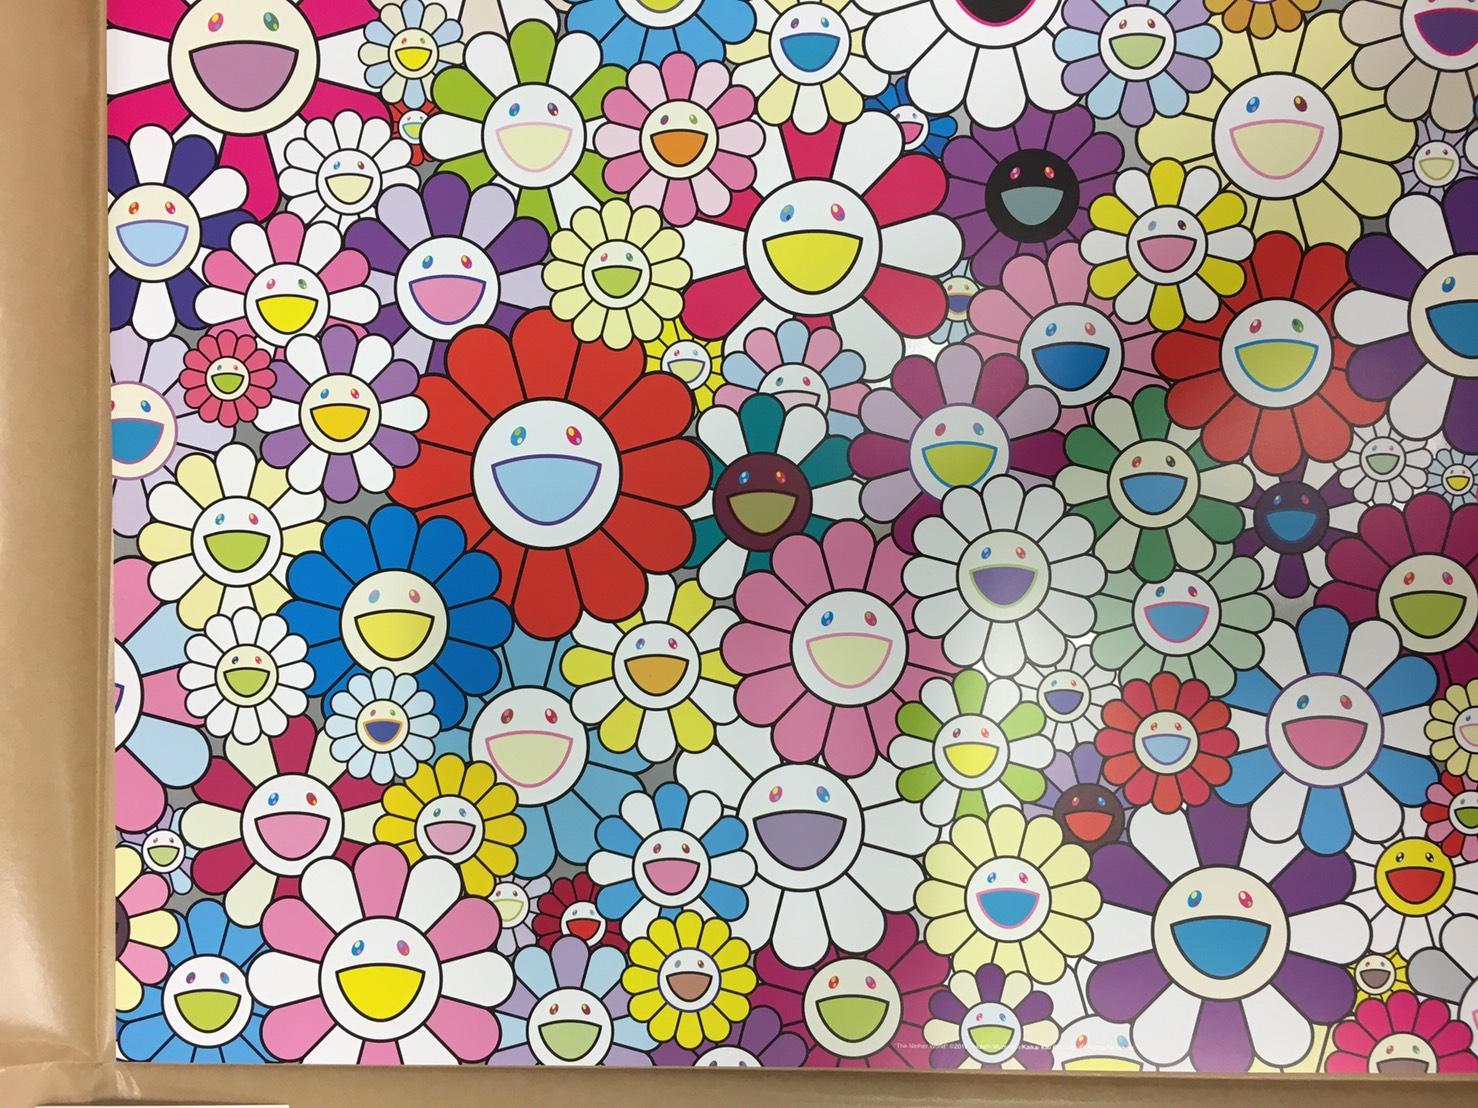 The nether world Limited Edition (print) by Takashi Murakami signed and numbered 2